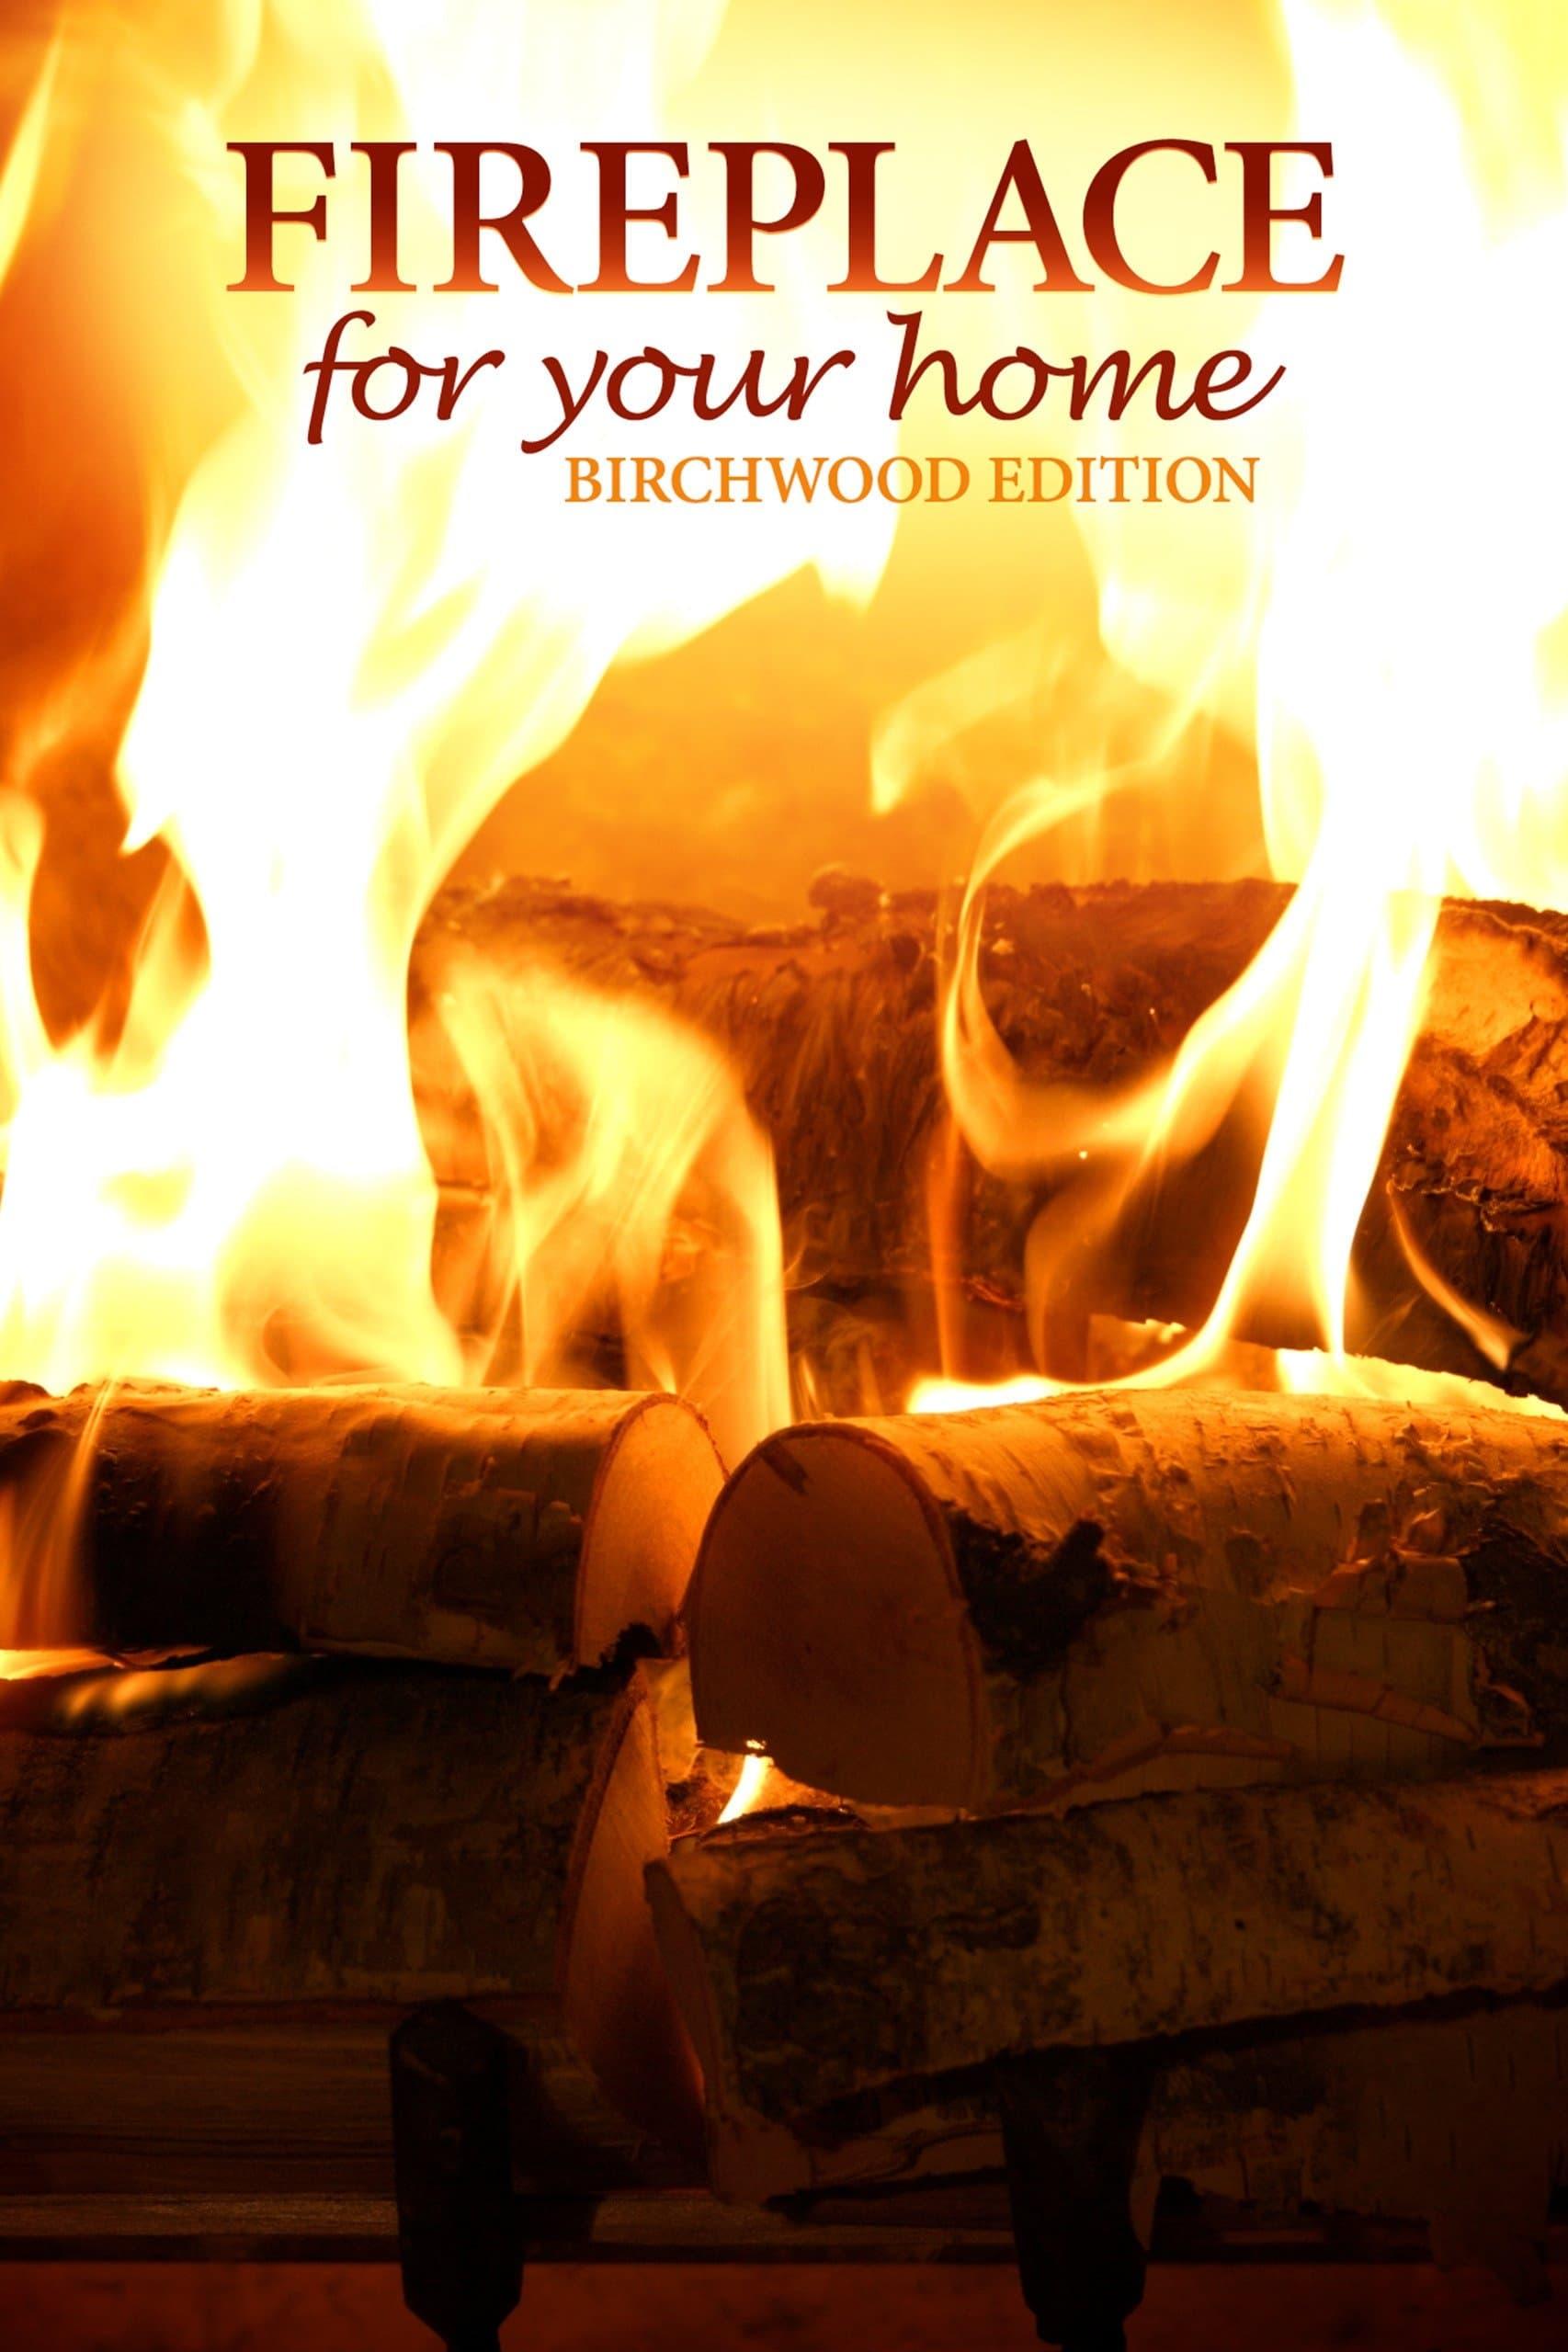 Fireplace 4K: Crackling Birchwood from Fireplace for Your Home poster